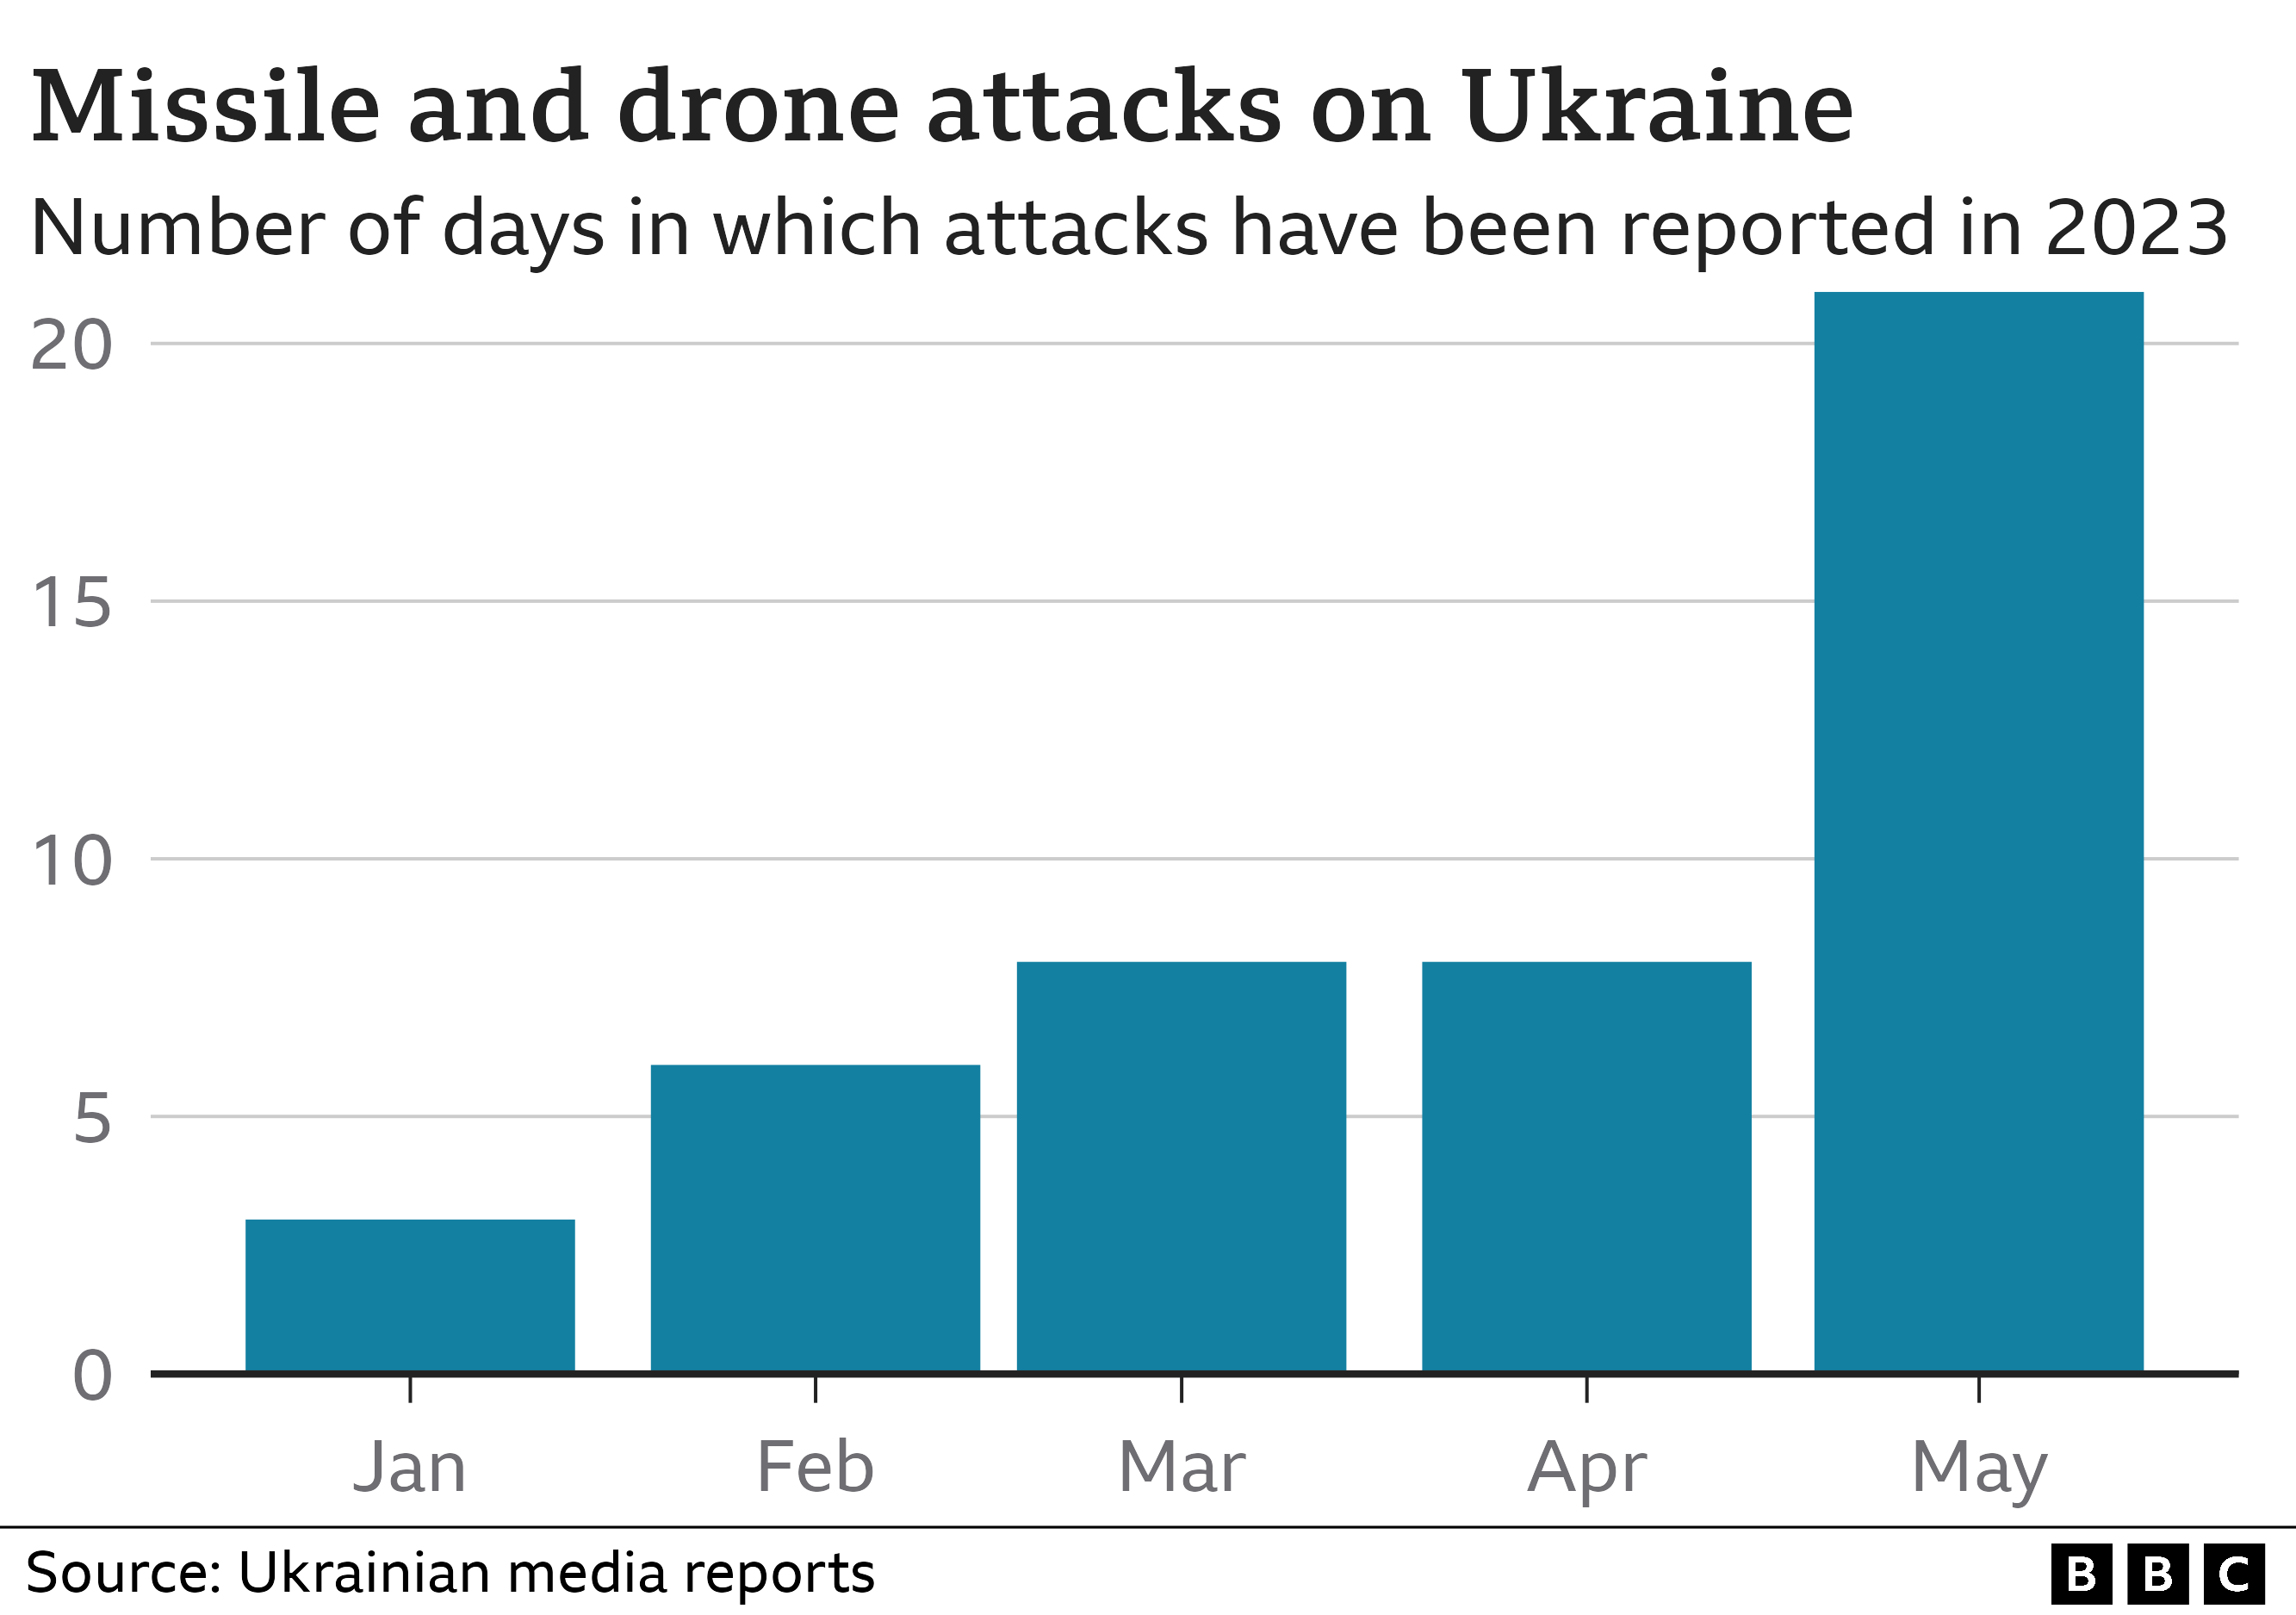 A column chart showing the number of days in which Russian missile and drone attacks on Ukraine have been reported in the Ukrainian media. The data shows a gradual increase from a low of three separate attacks in January to eight total attacks in Mach and April, before a sharp rise to 21 attacks in May